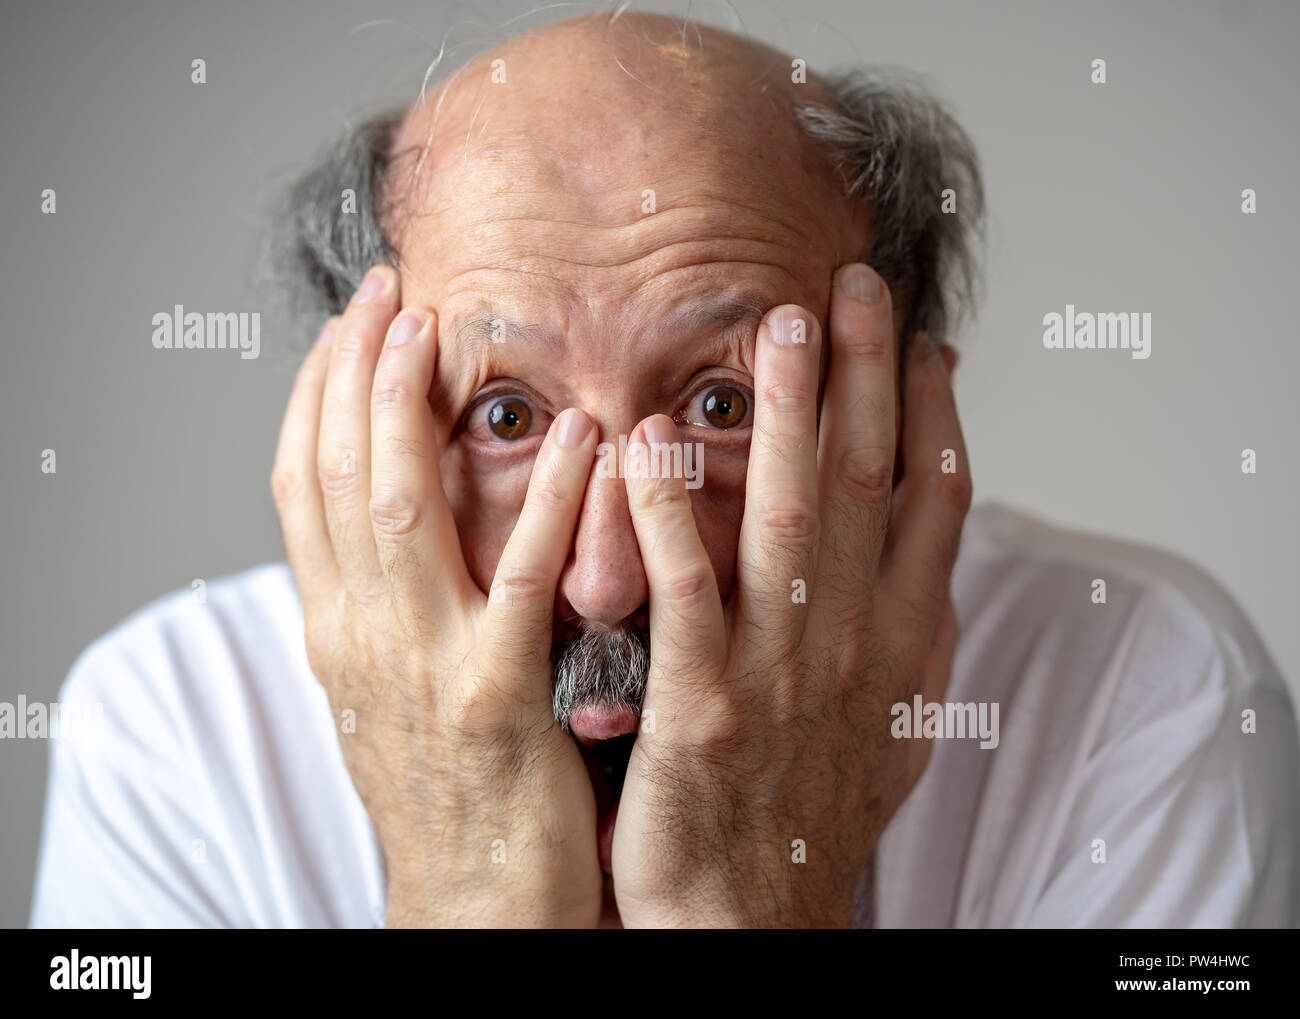 Close Up Portrait Of A Scared Frightened Old Man In Expression Of Fear